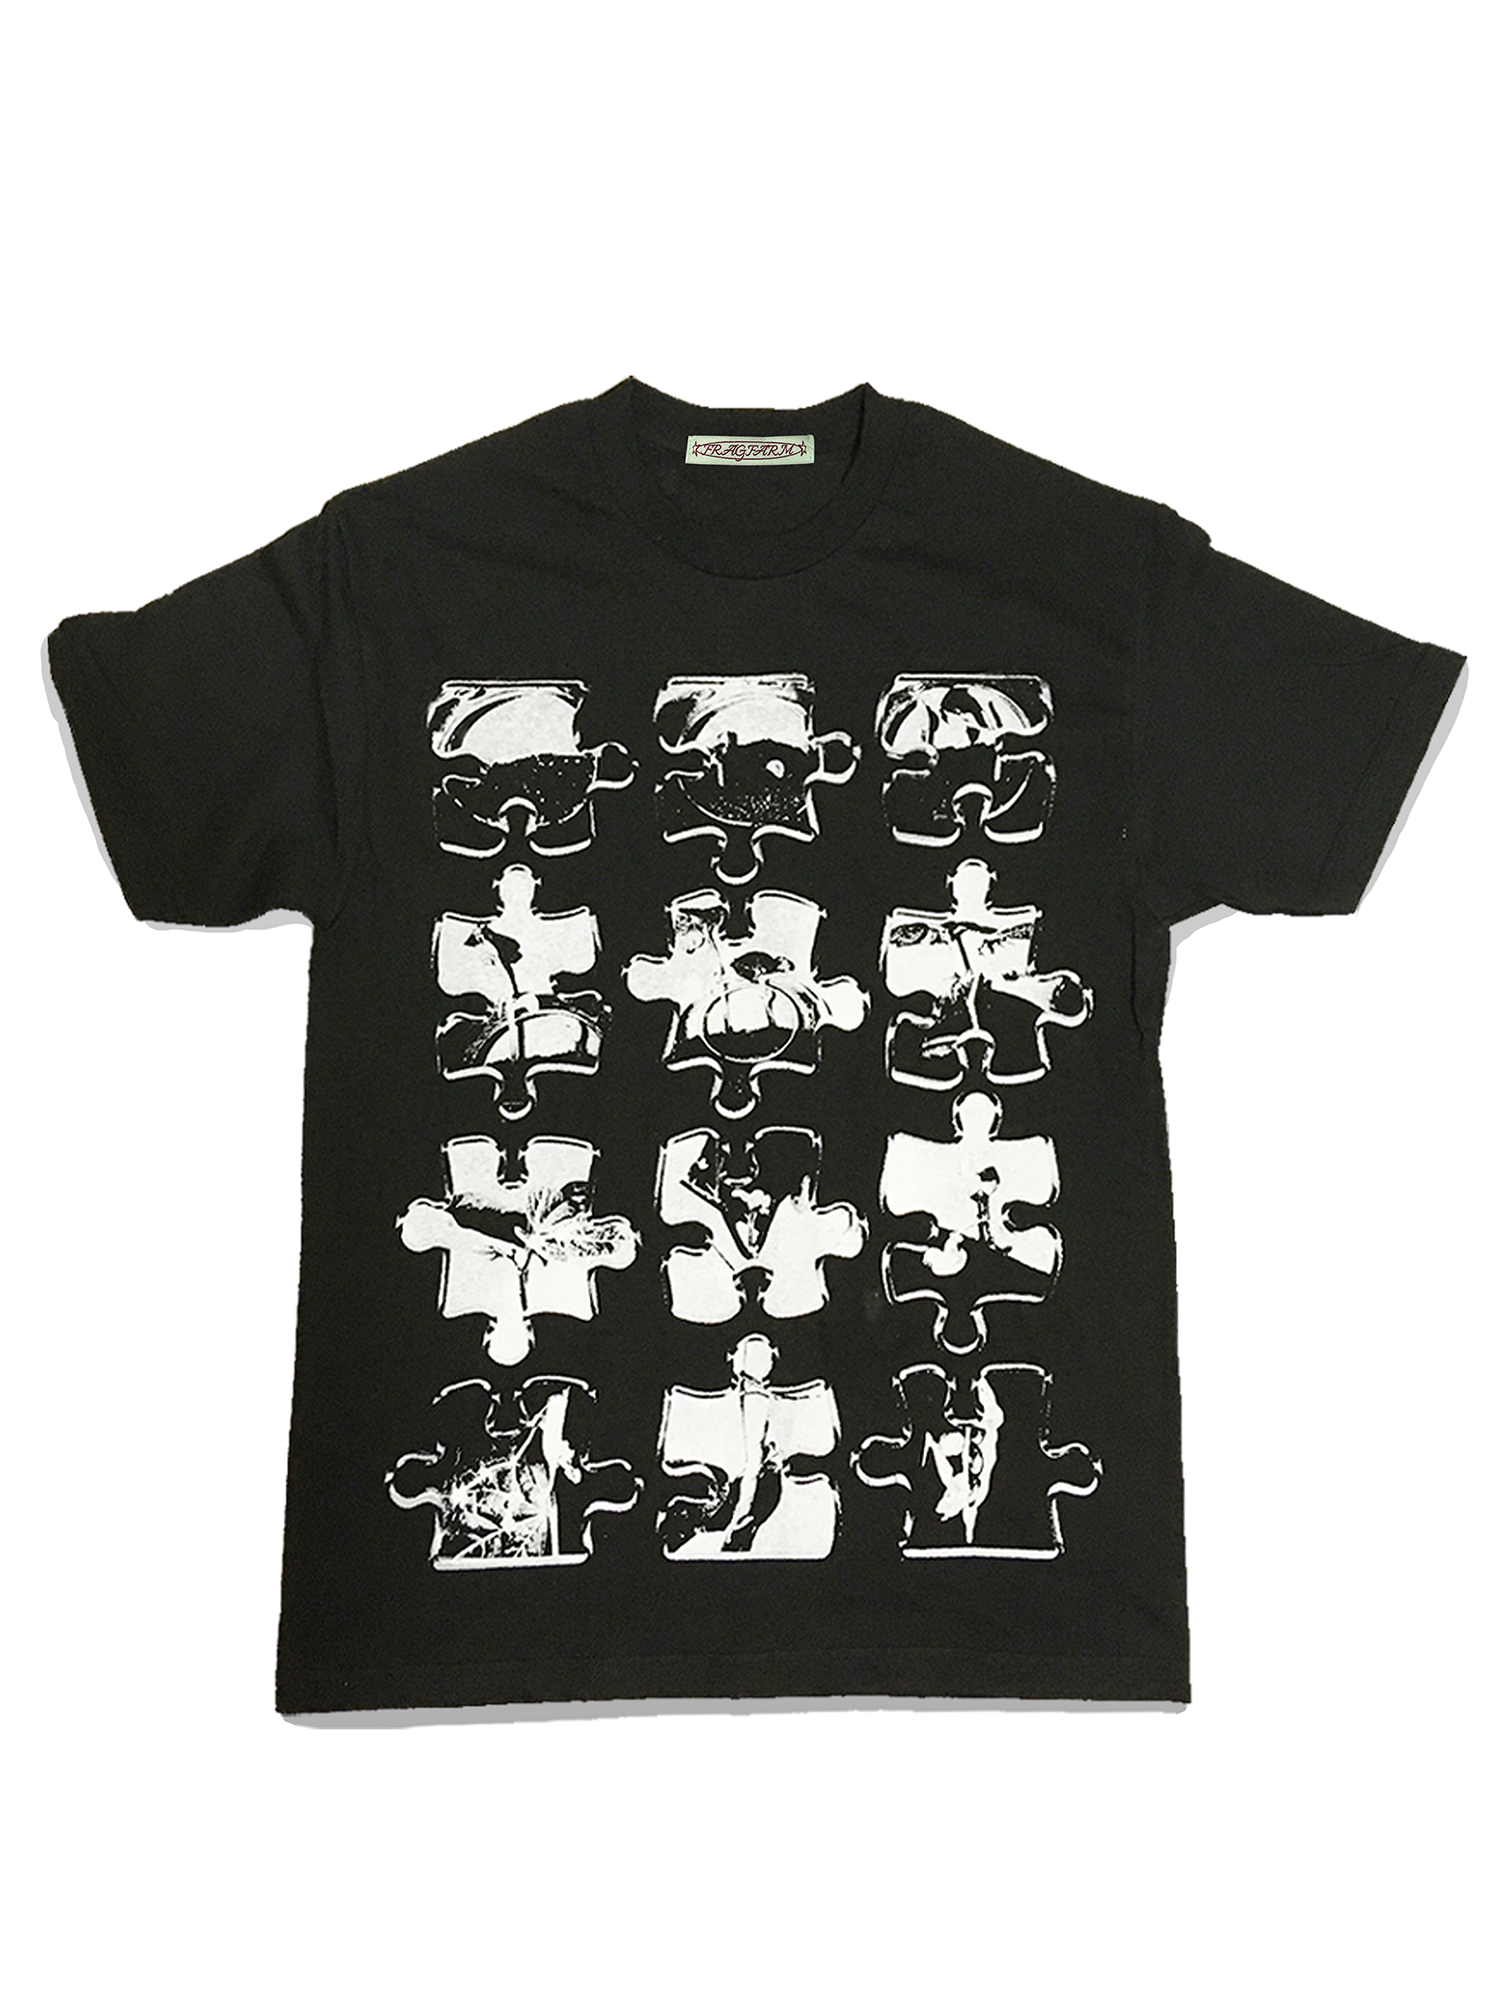 Timescape of Kidney Beans Tee - Black